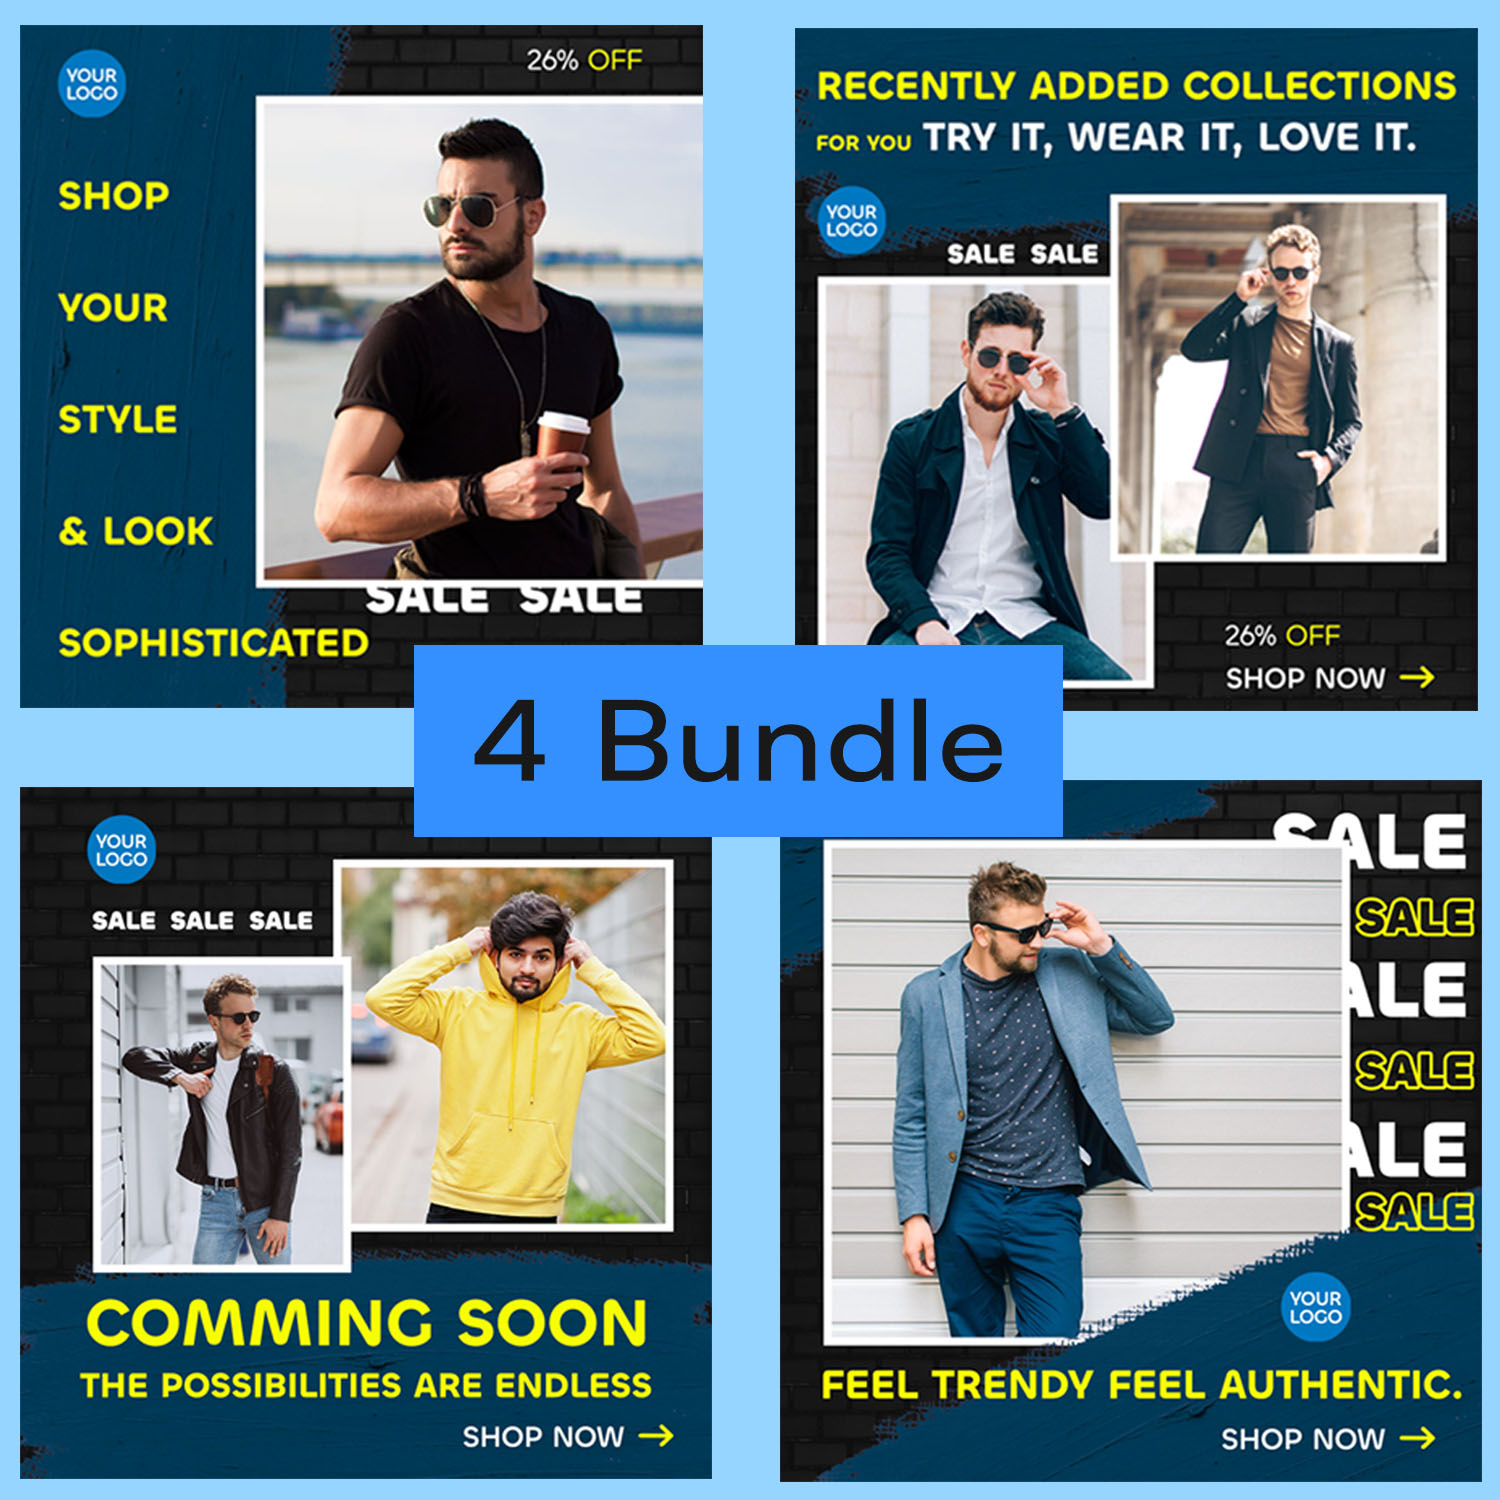 Sale And Fashion - Social Media Post Bundle Tamplates For Instagram Preview Image.